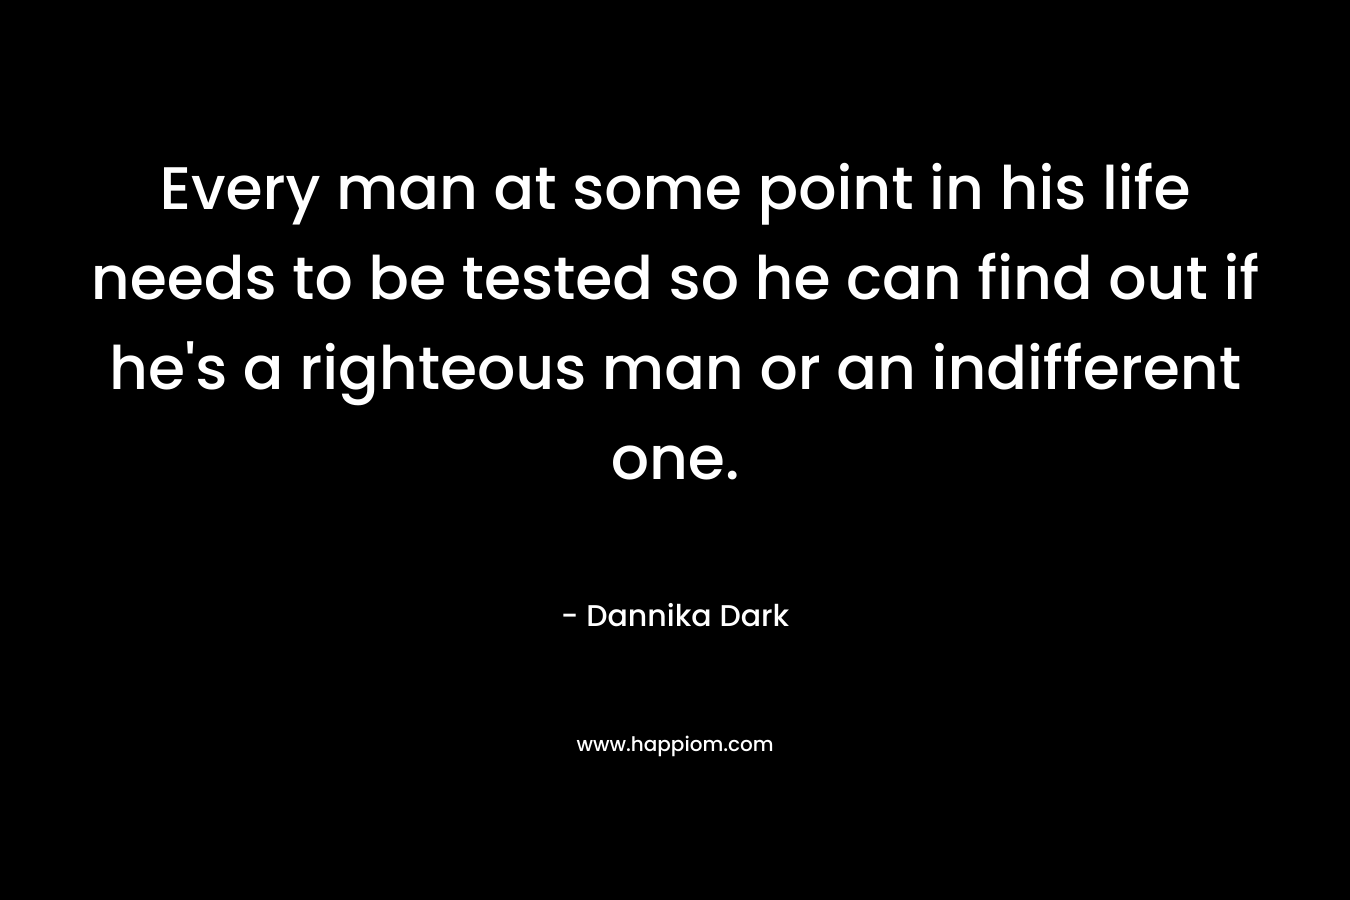 Every man at some point in his life needs to be tested so he can find out if he’s a righteous man or an indifferent one. – Dannika Dark